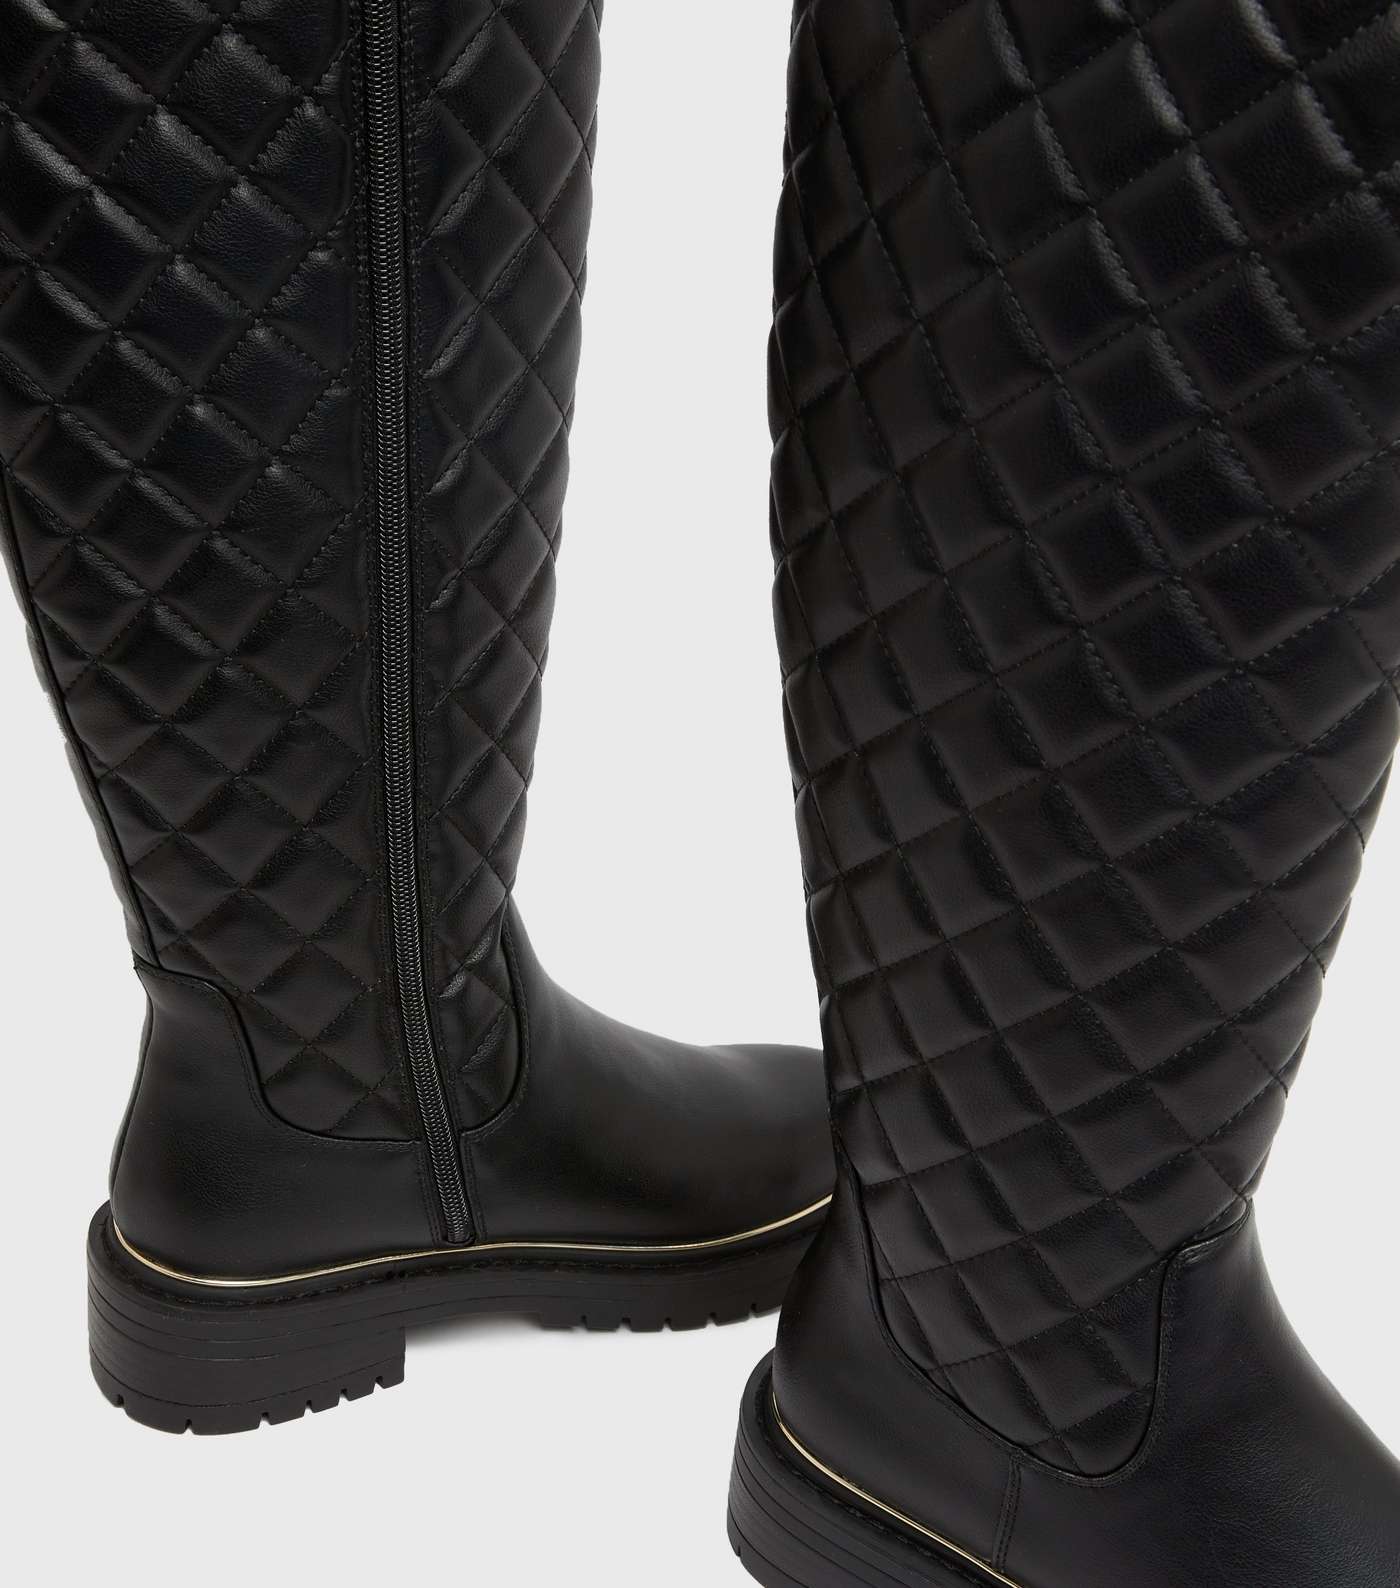 Black Quilted Metal Trim Knee High Boots Image 4